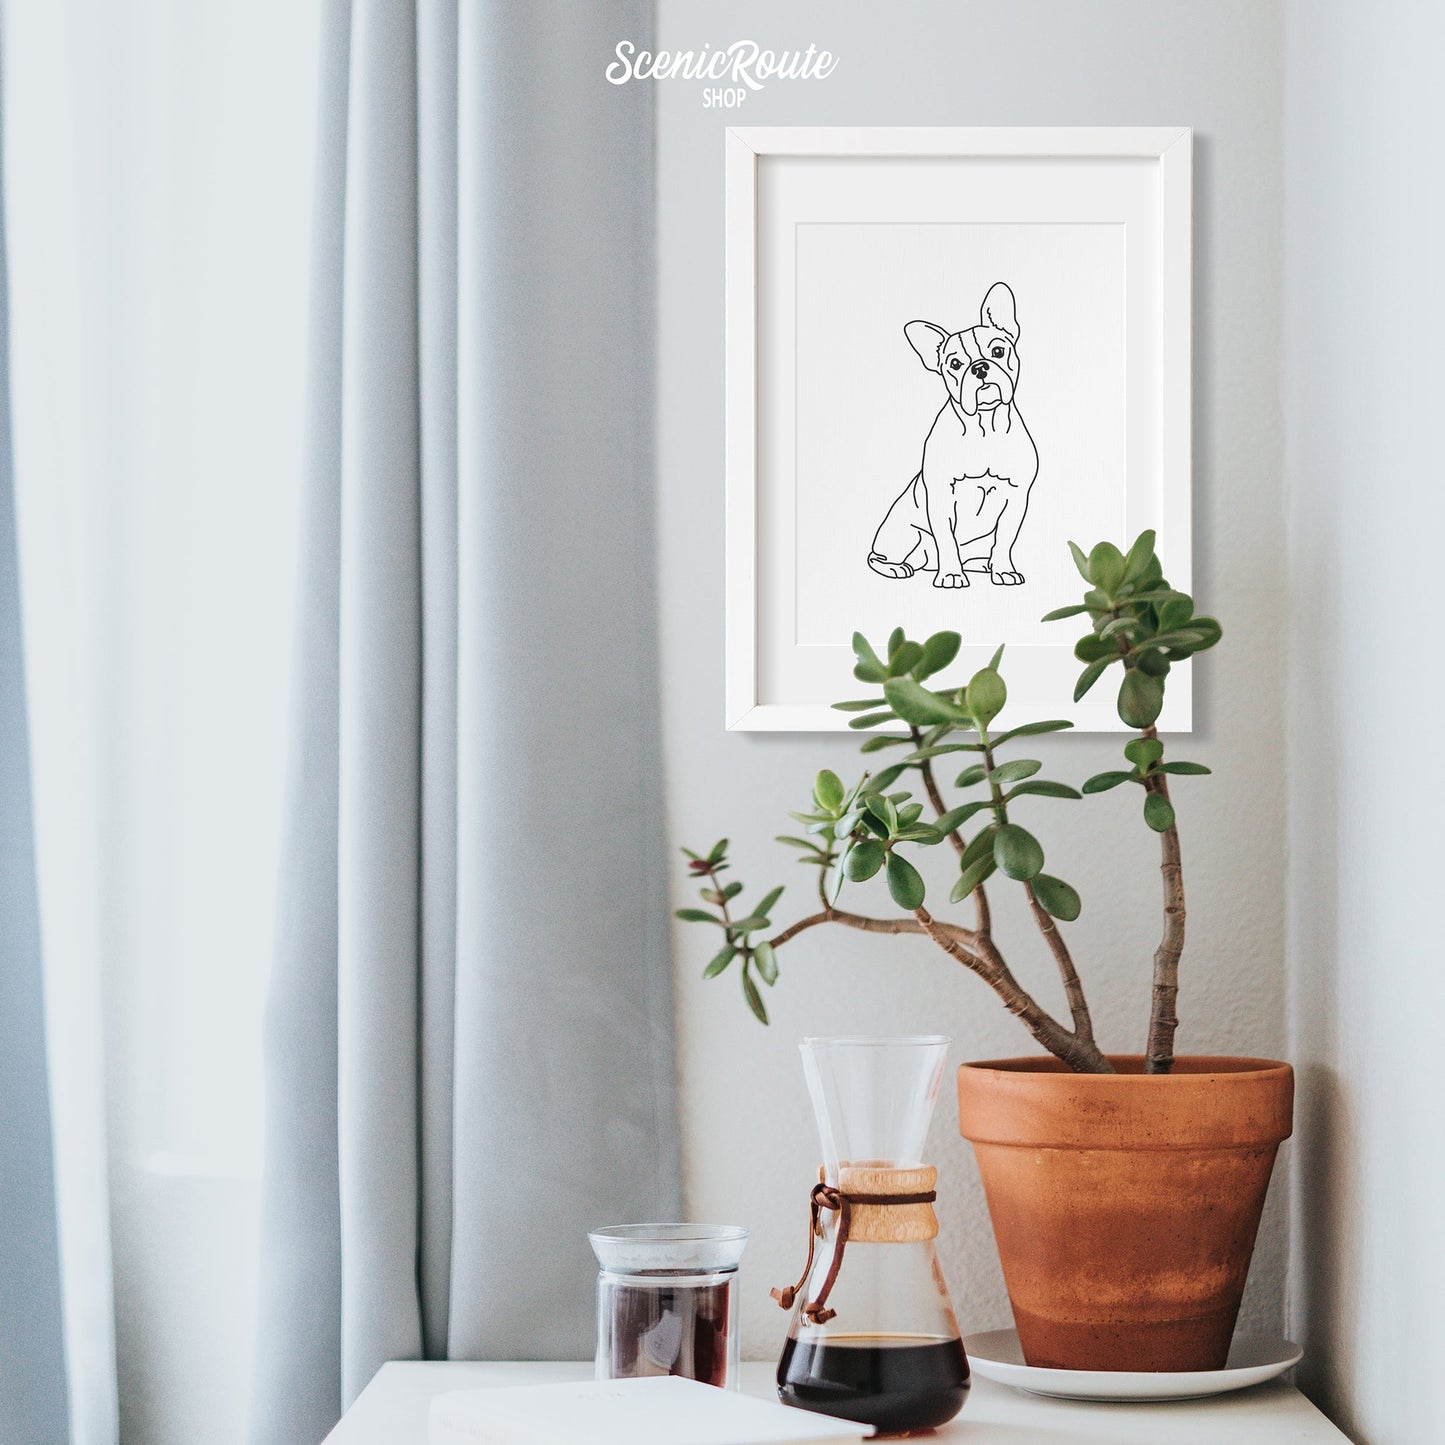 A framed line art drawing of a Boston Terrier dog hung above a plant in a pot on a table